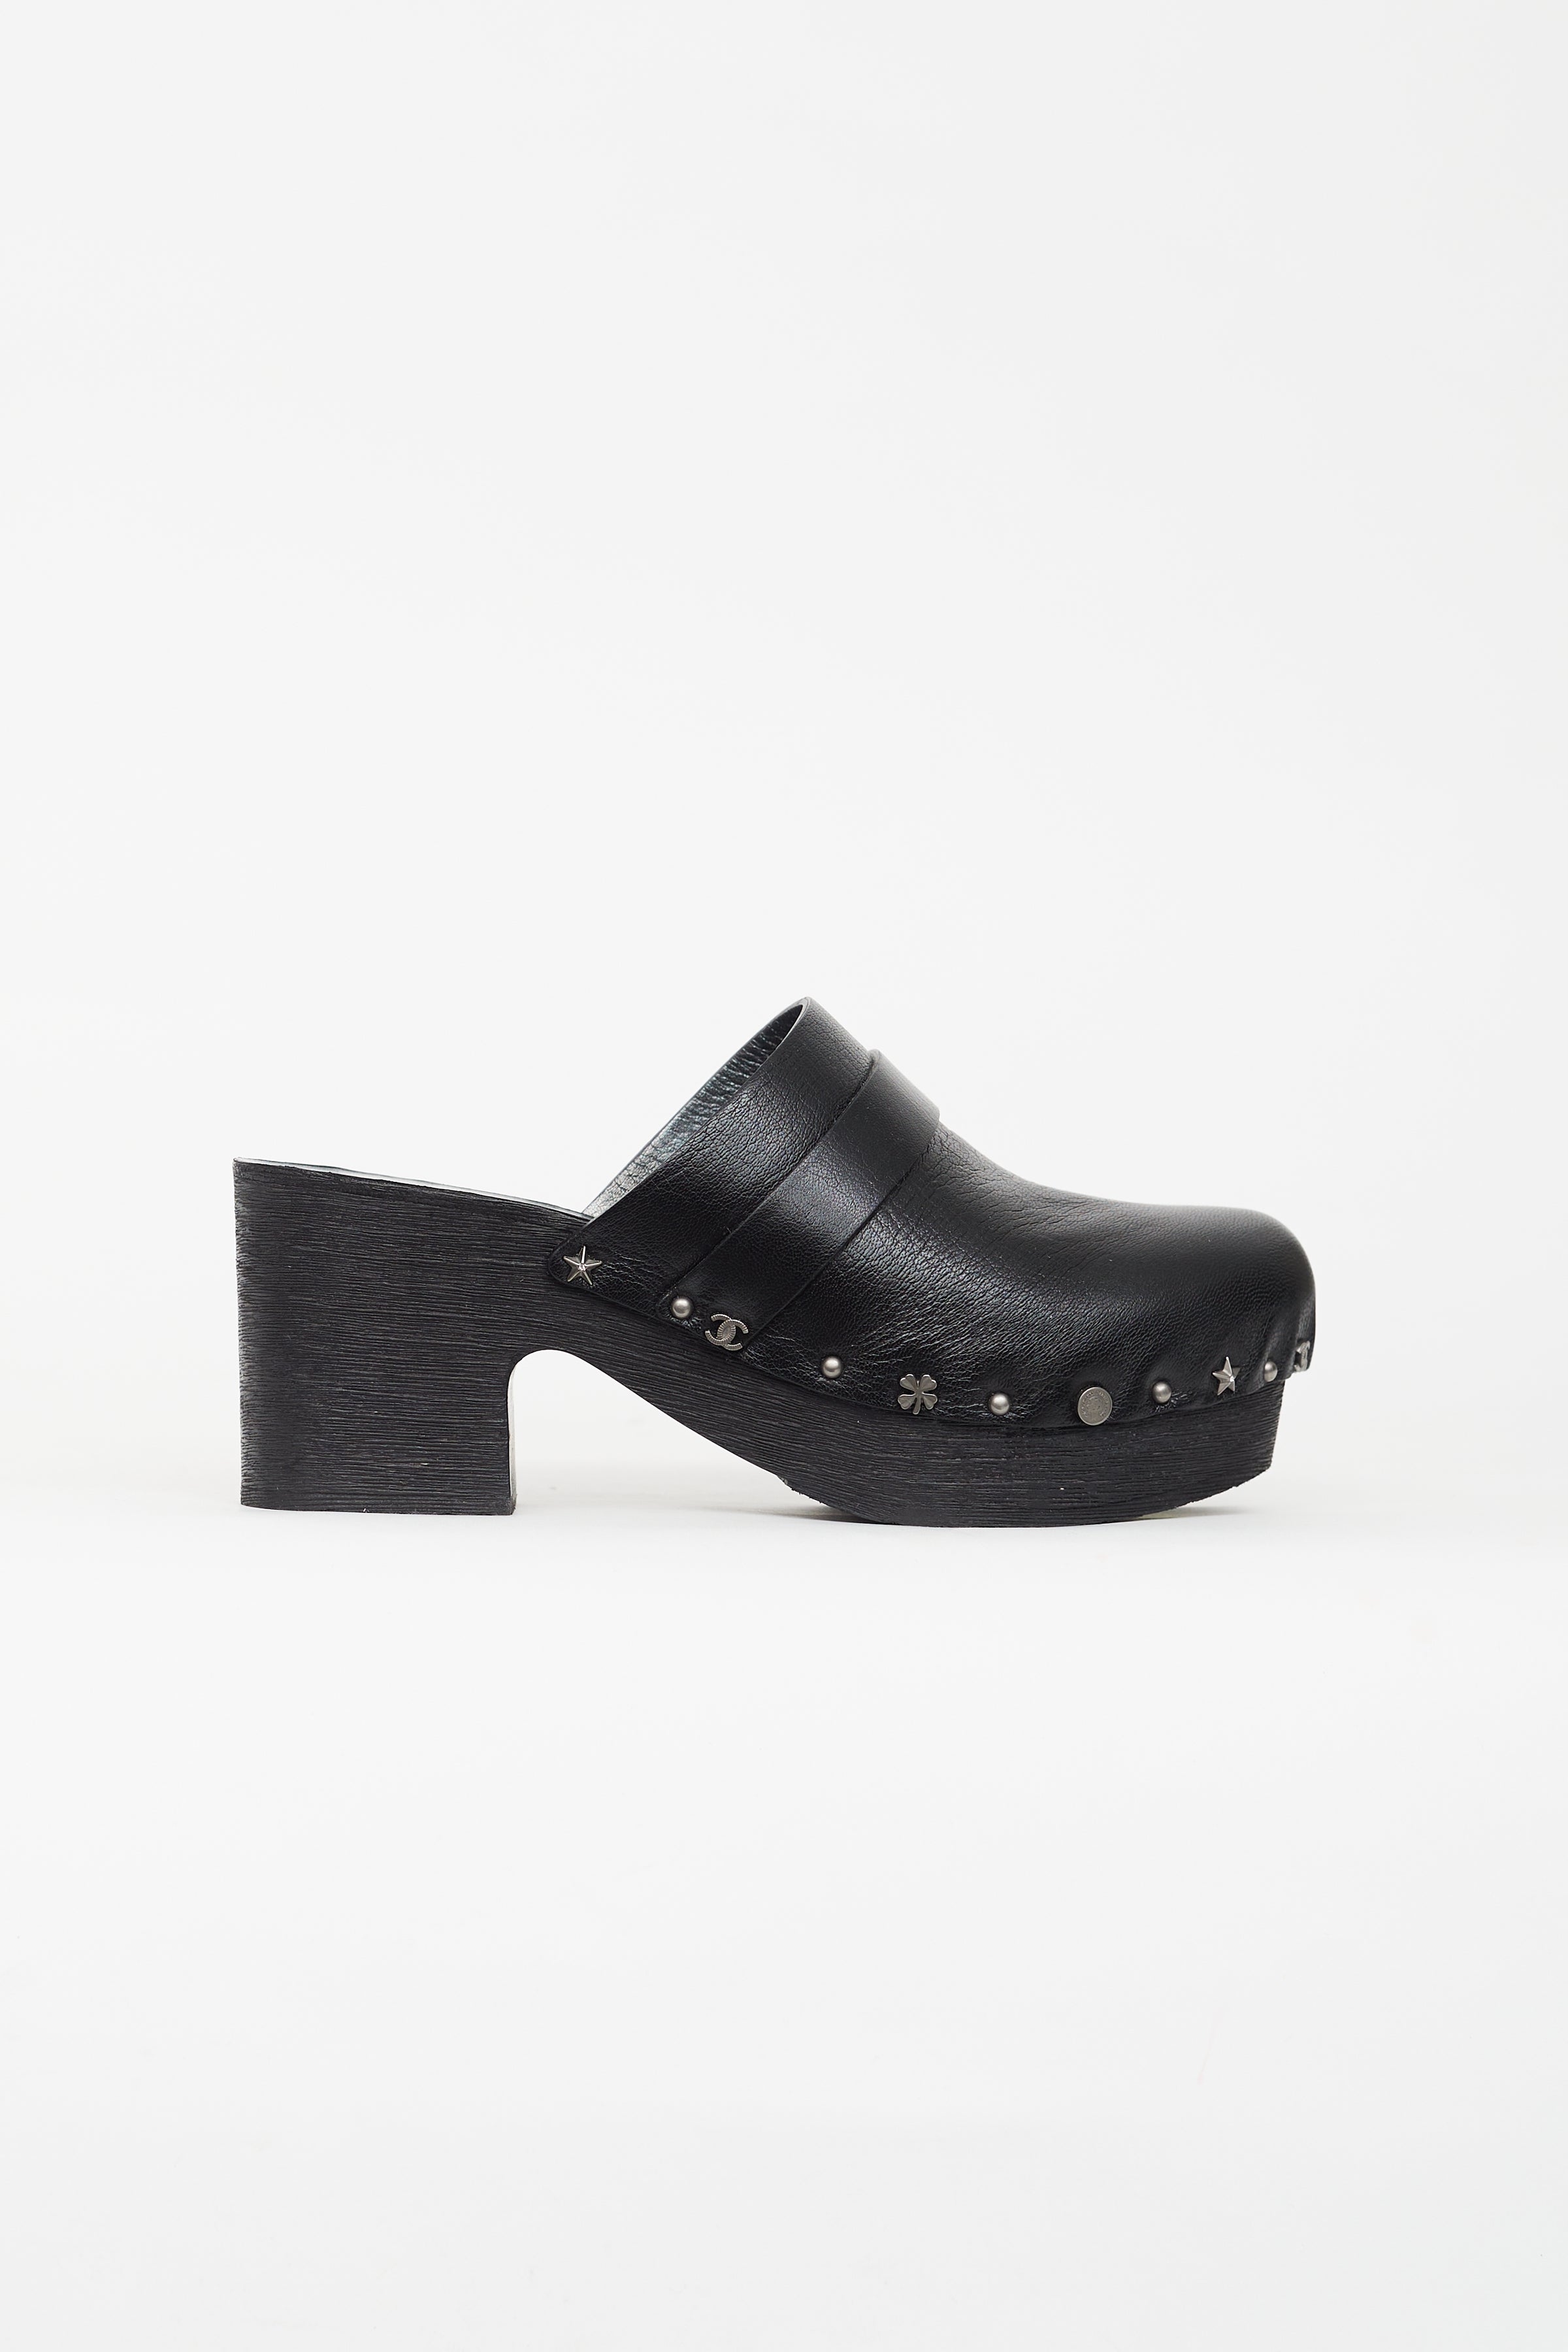 Chanel // Black Leather Charm Clog Mule – VSP Consignment